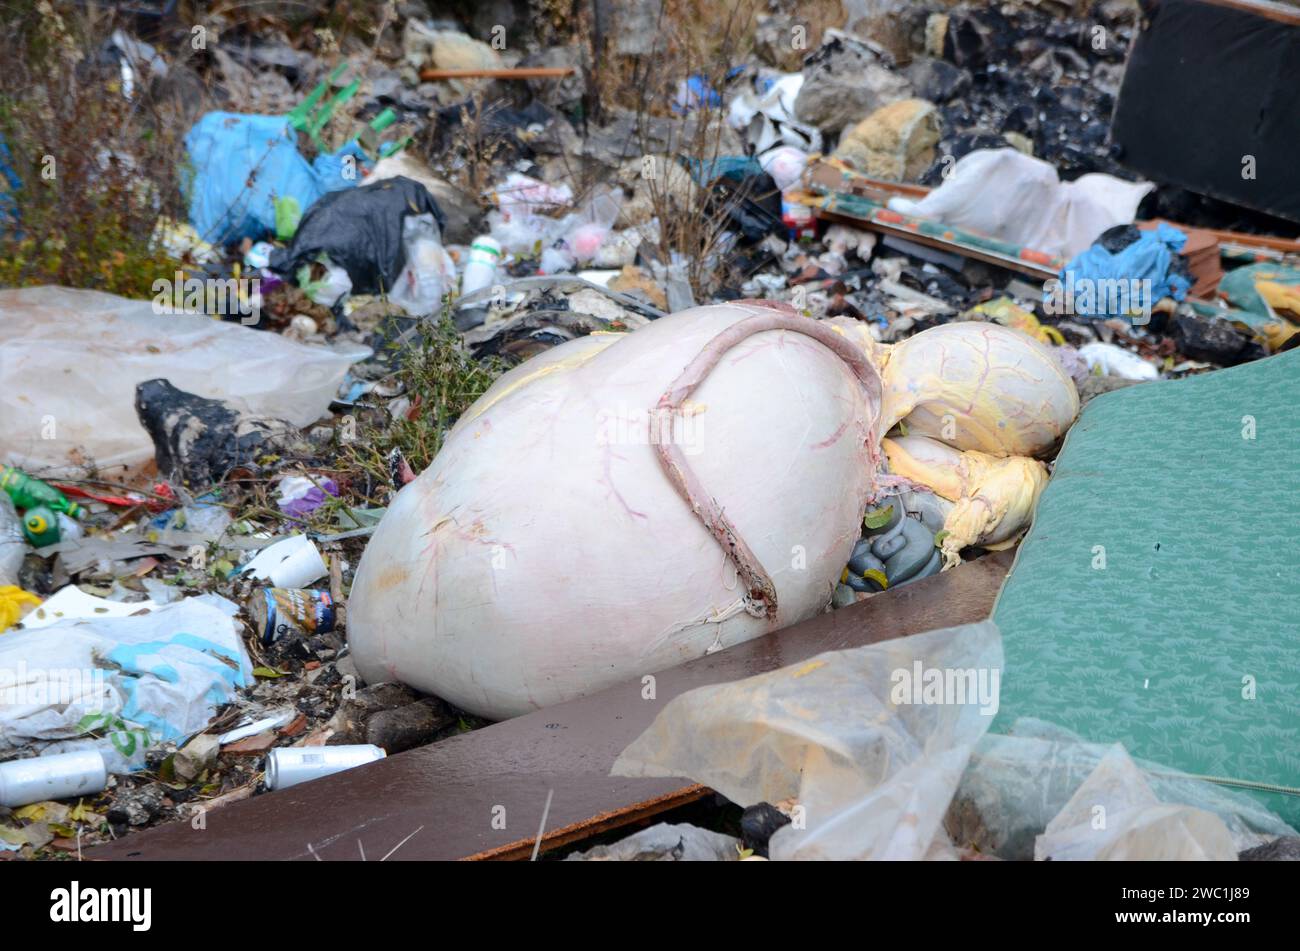 Wild garbage dump in nature. Open landfill site. Pile of garbage. Illegal dumping. Environmental pollution. Waste on landfill area. Animal offal Stock Photo